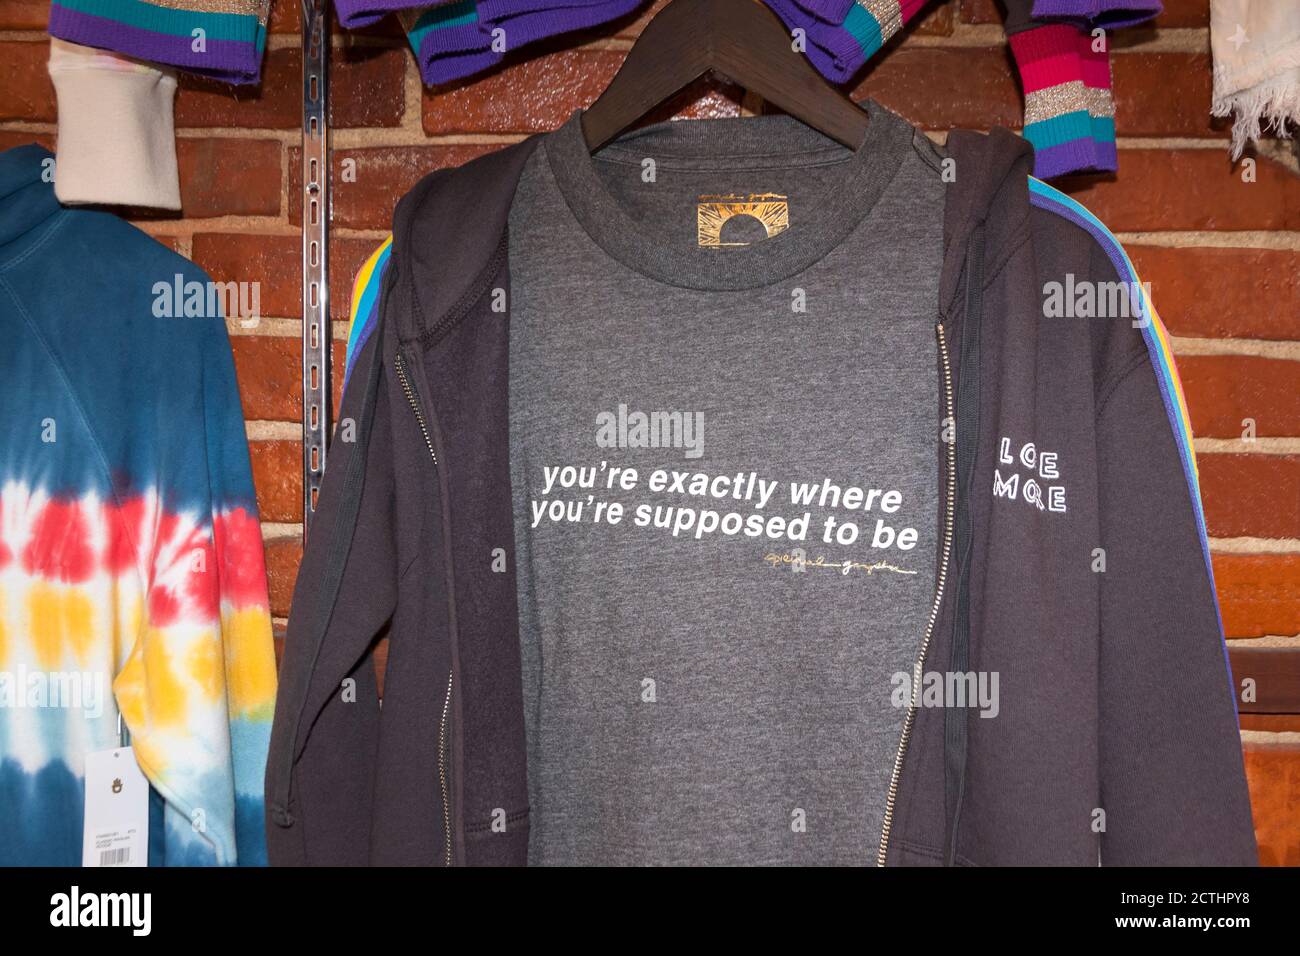 T-shirt message:  "you're exactly where you're supposed to be." Stock Photo